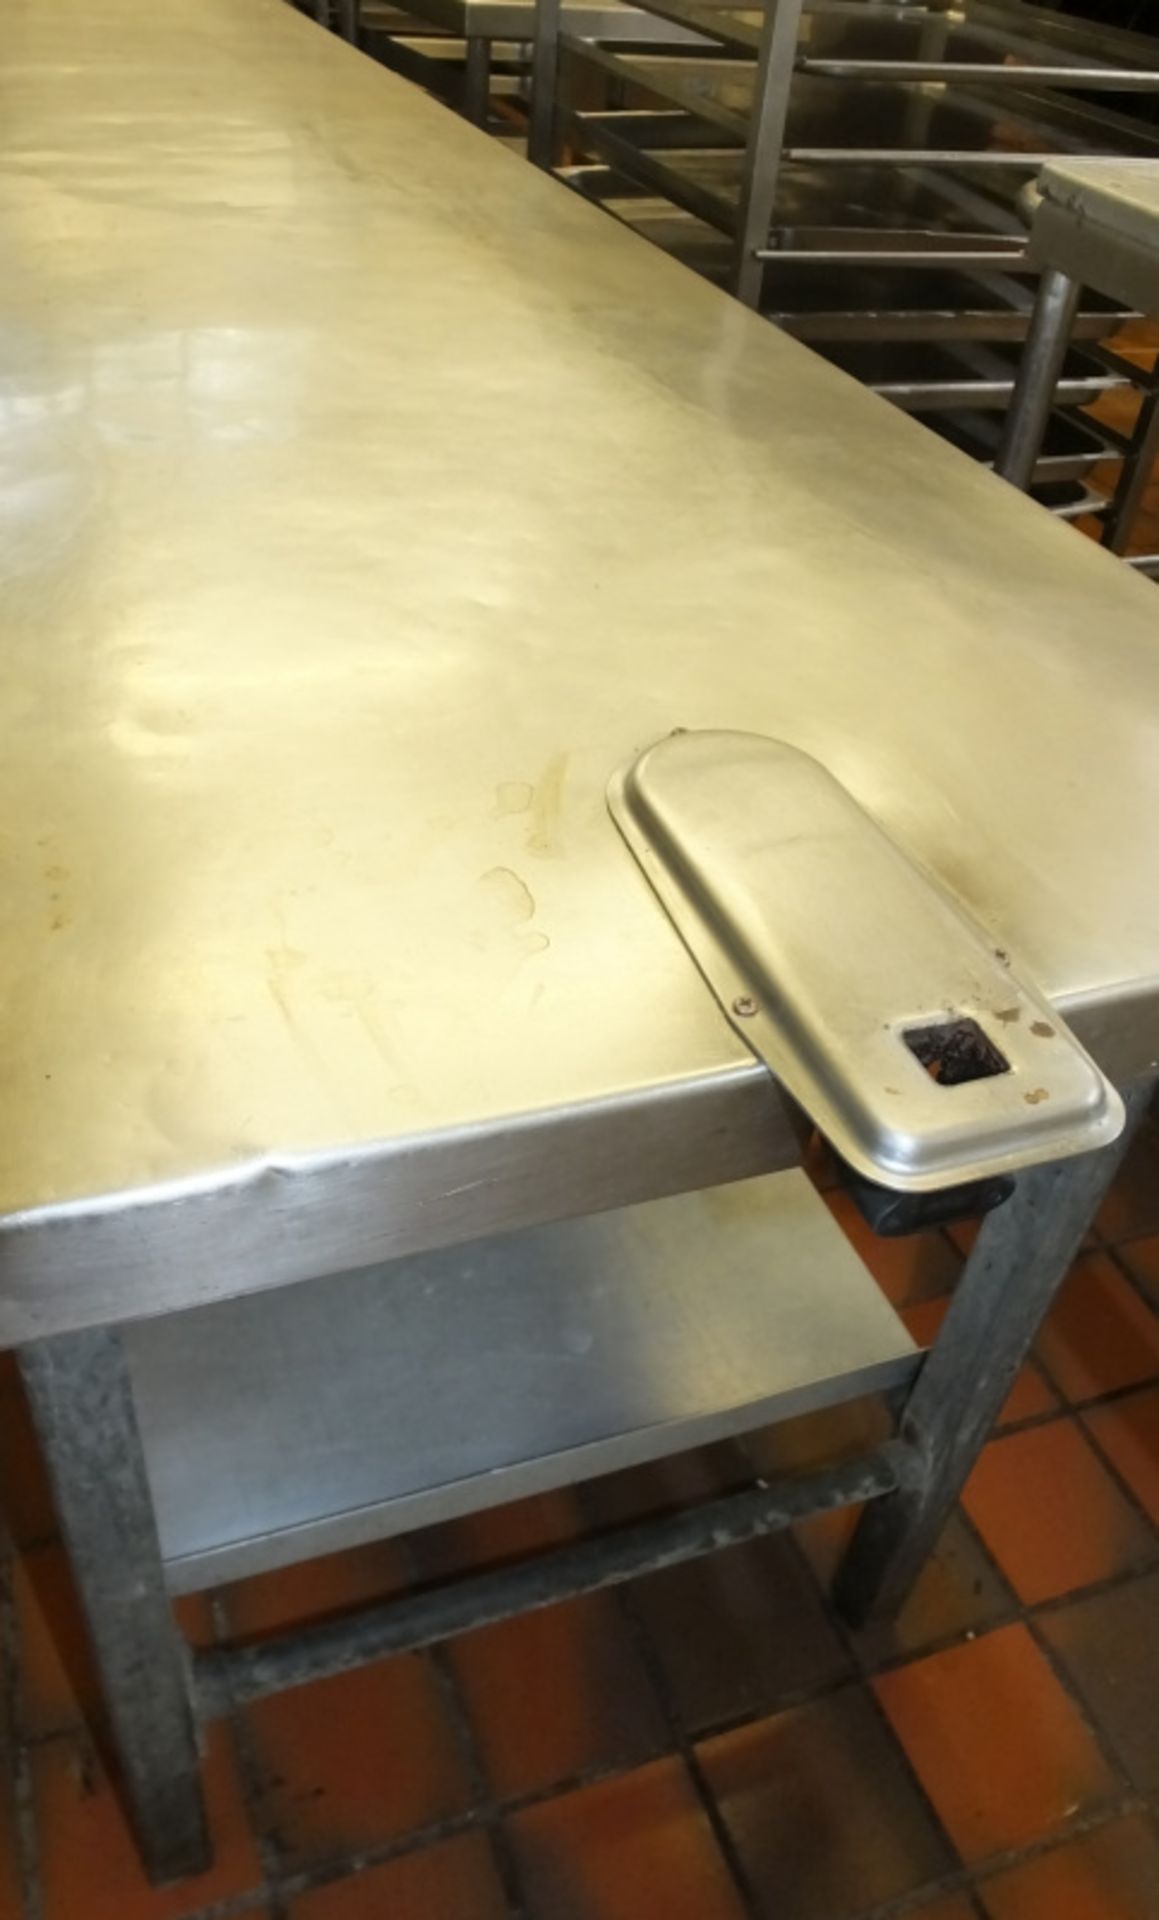 Benham Stainless Steel Table - L3410 x D640 x H860mm - Image 3 of 4